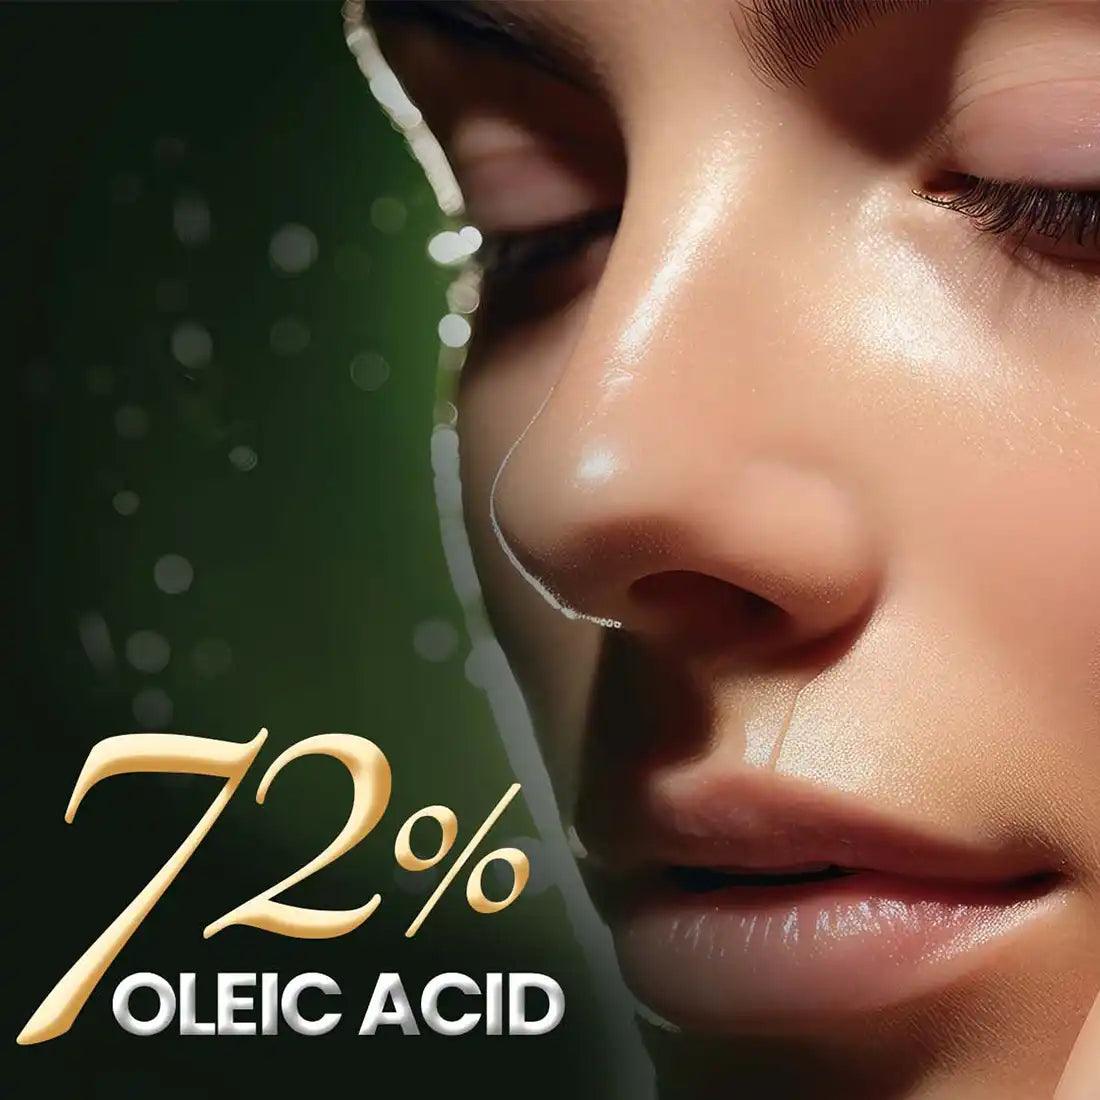 Nature Sure Pores and Marks Luxury Facial Oil Contains 72% Oleic Acid and Is One of The Best Moisturizers - everteen-neud.com